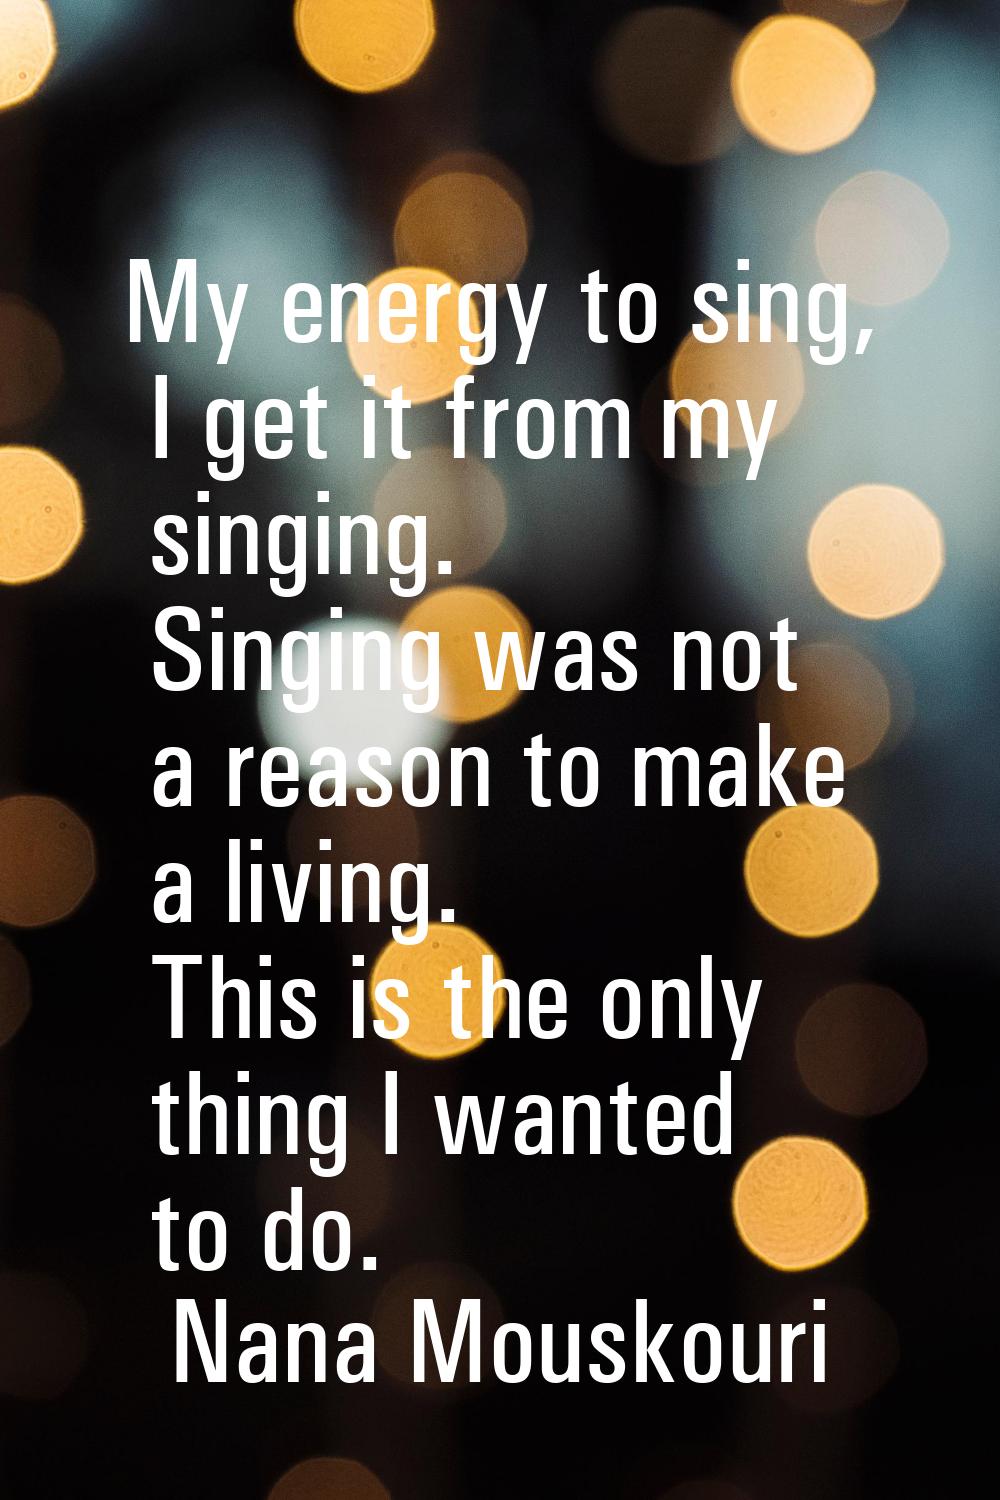 My energy to sing, I get it from my singing. Singing was not a reason to make a living. This is the